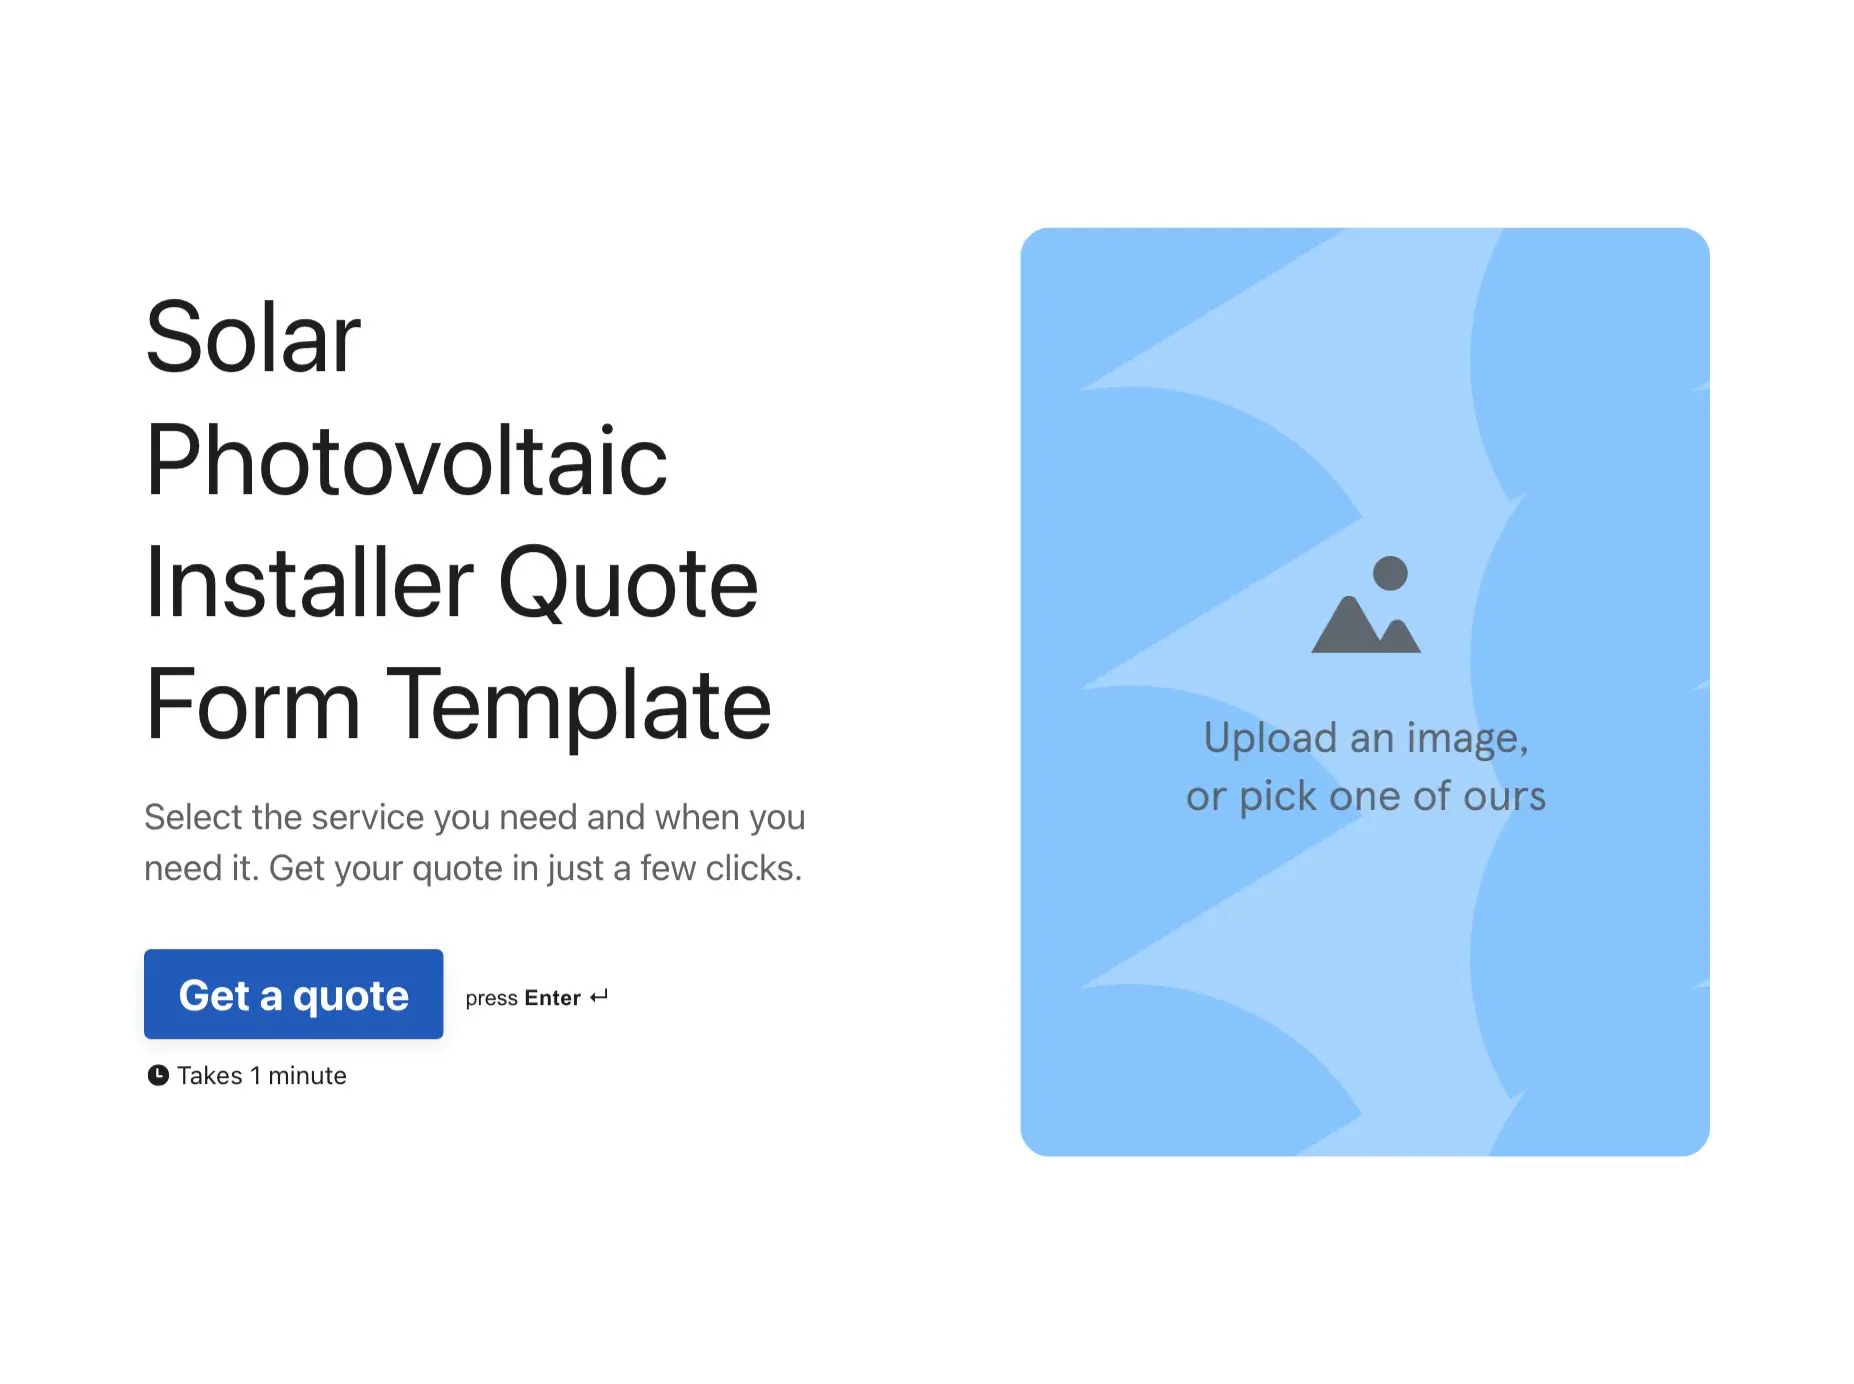 Solar Photovoltaic Installer Quote Form Template Hero